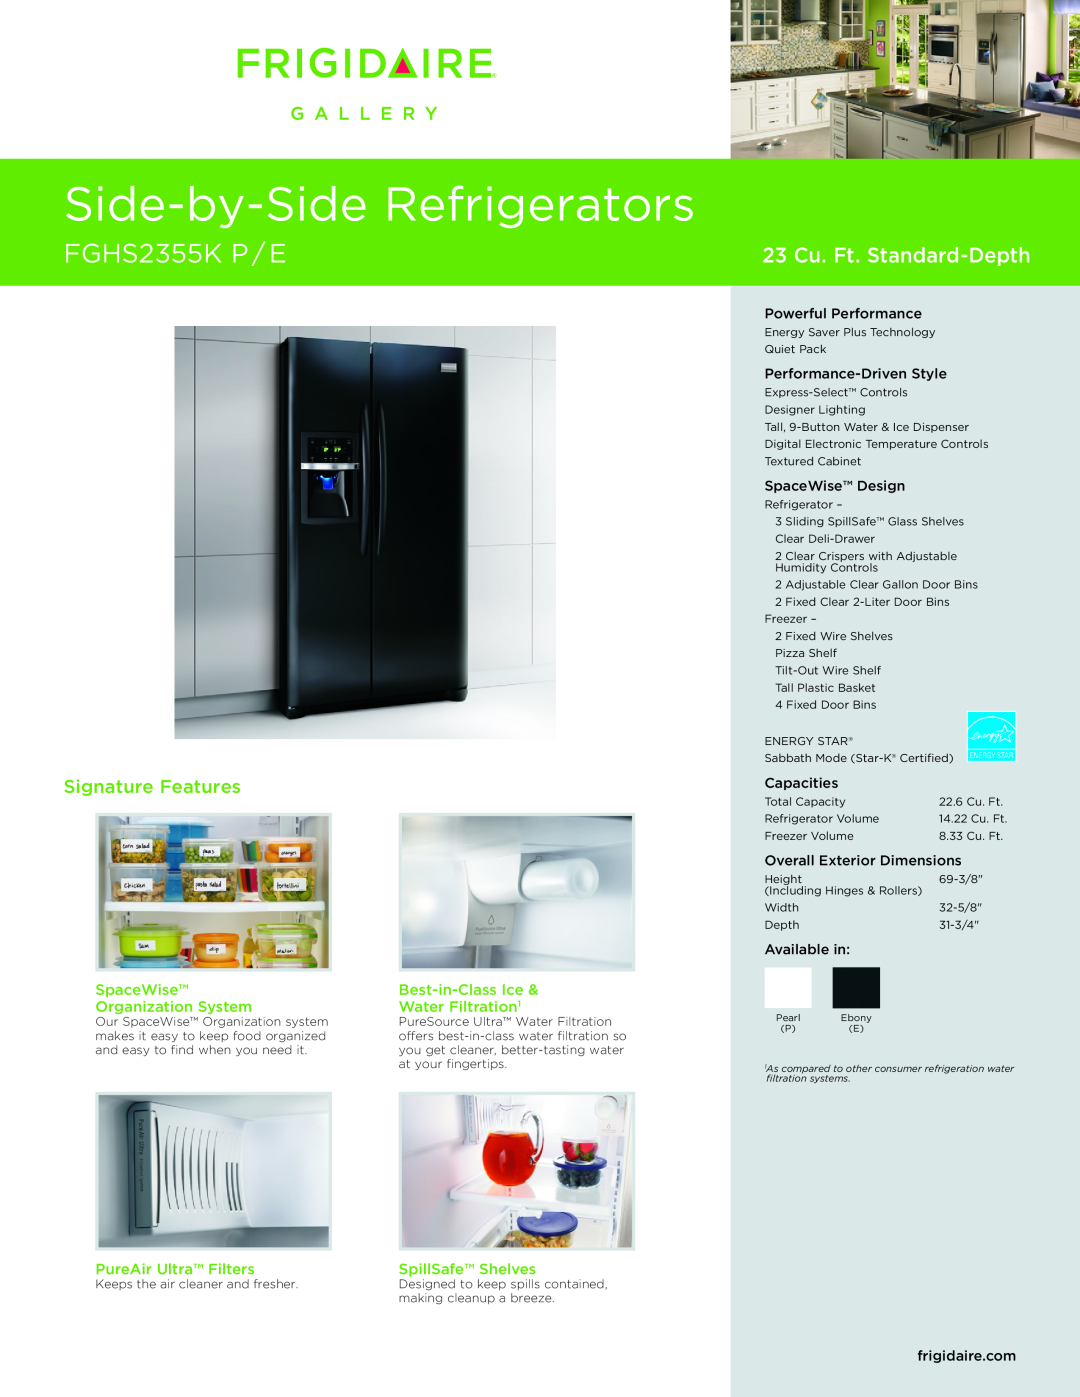 Frigidaire FGHS2355KP dimensions SpaceWise, Best-in-ClassIce, Organization System, Water Filtration1, SpillSafe Shelves 